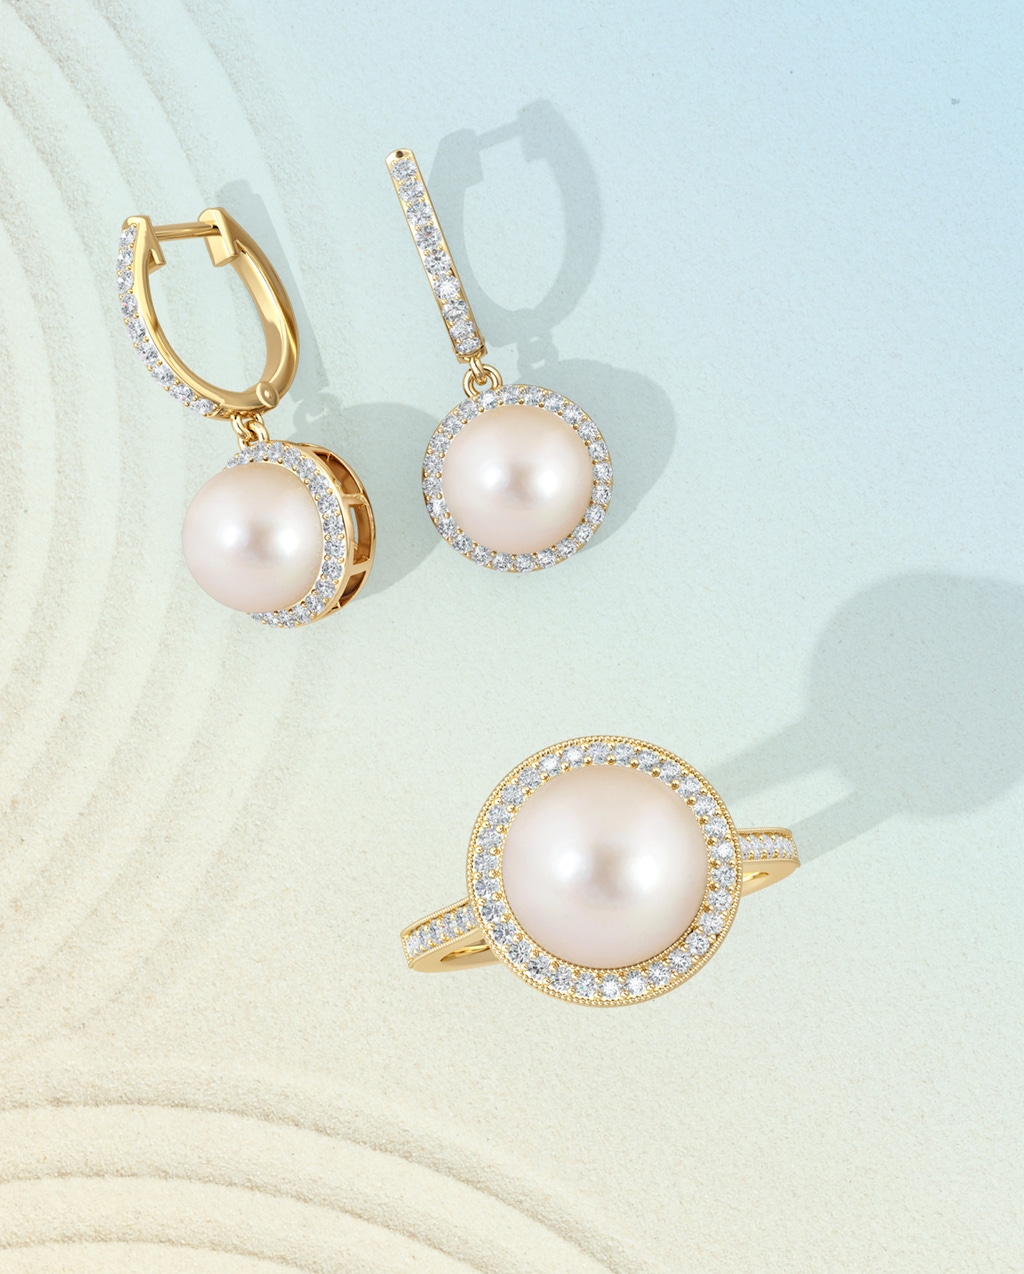 Pearl Collection